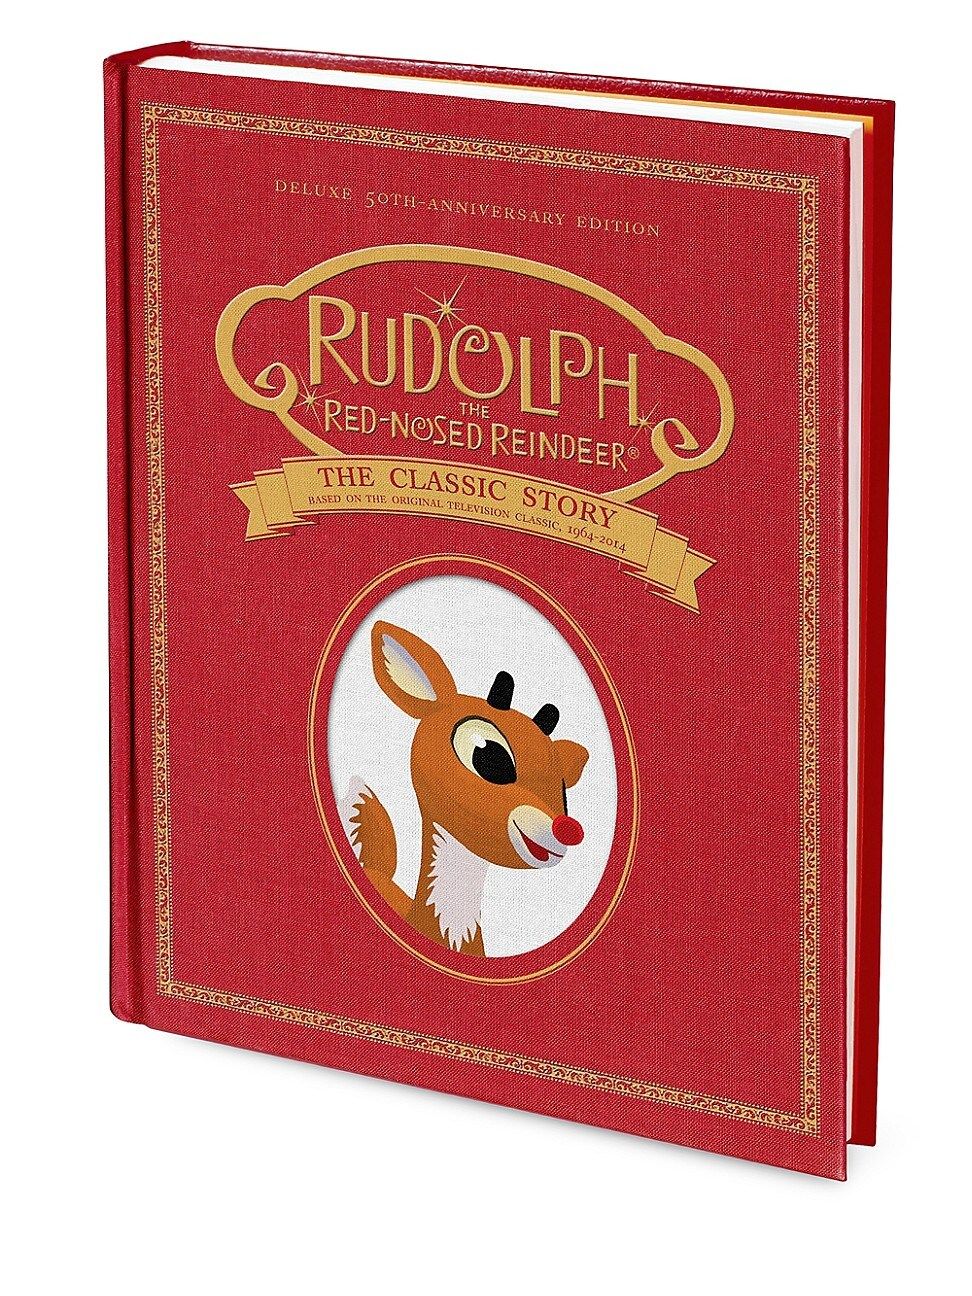 Rudolph The Red-Nosed Reindeer Book | Saks Fifth Avenue